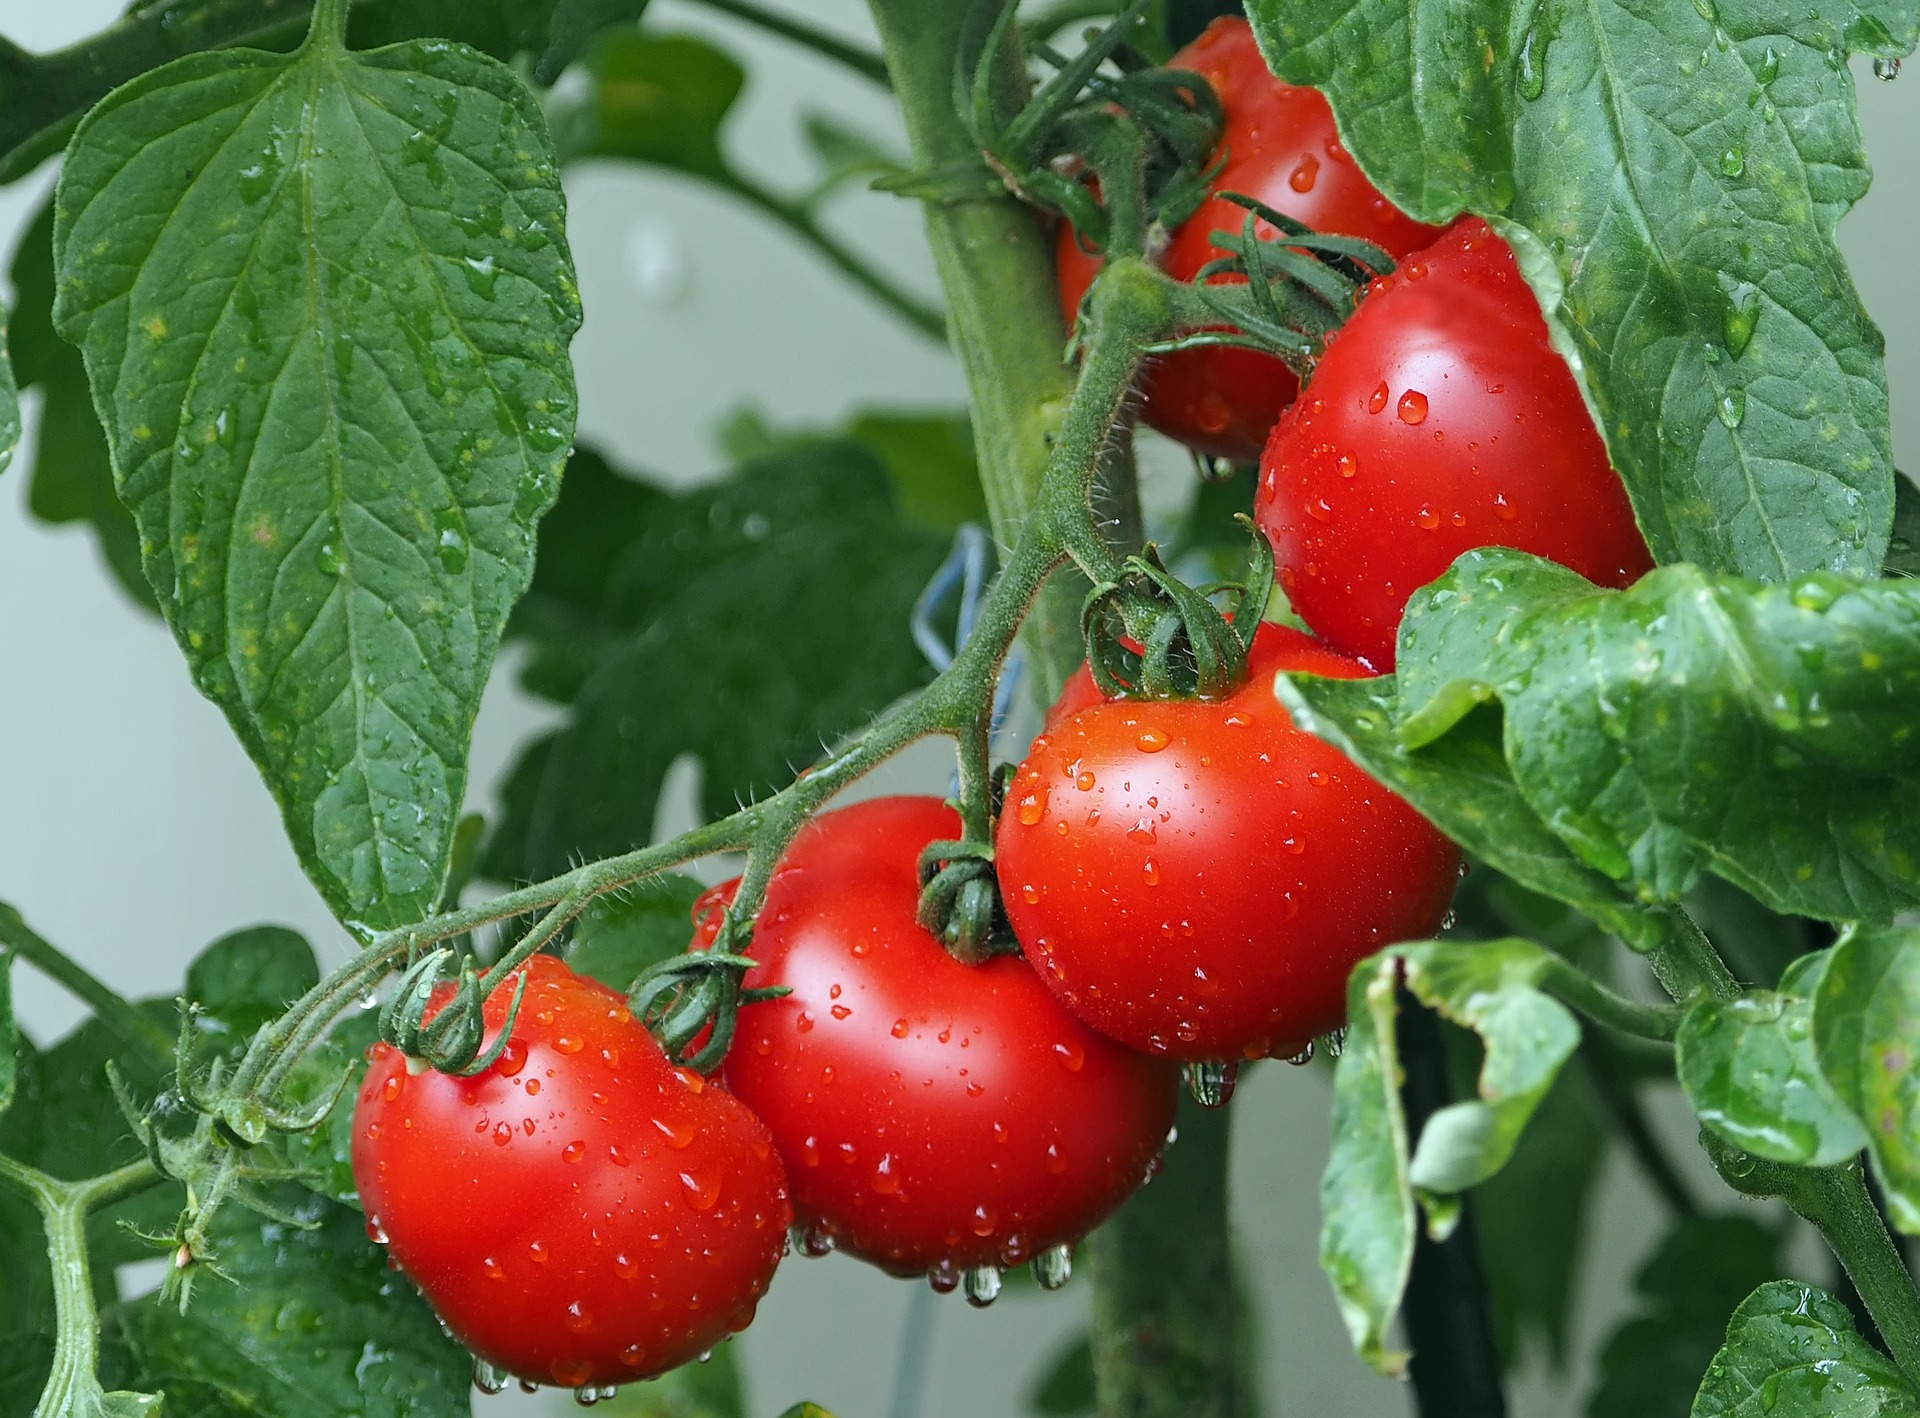 In the March 25 Spring Fever Forum, Harlene Hatterman-Valenti, NDSU expert in high-value crops, will review the steps to producing healthy tomatoes.